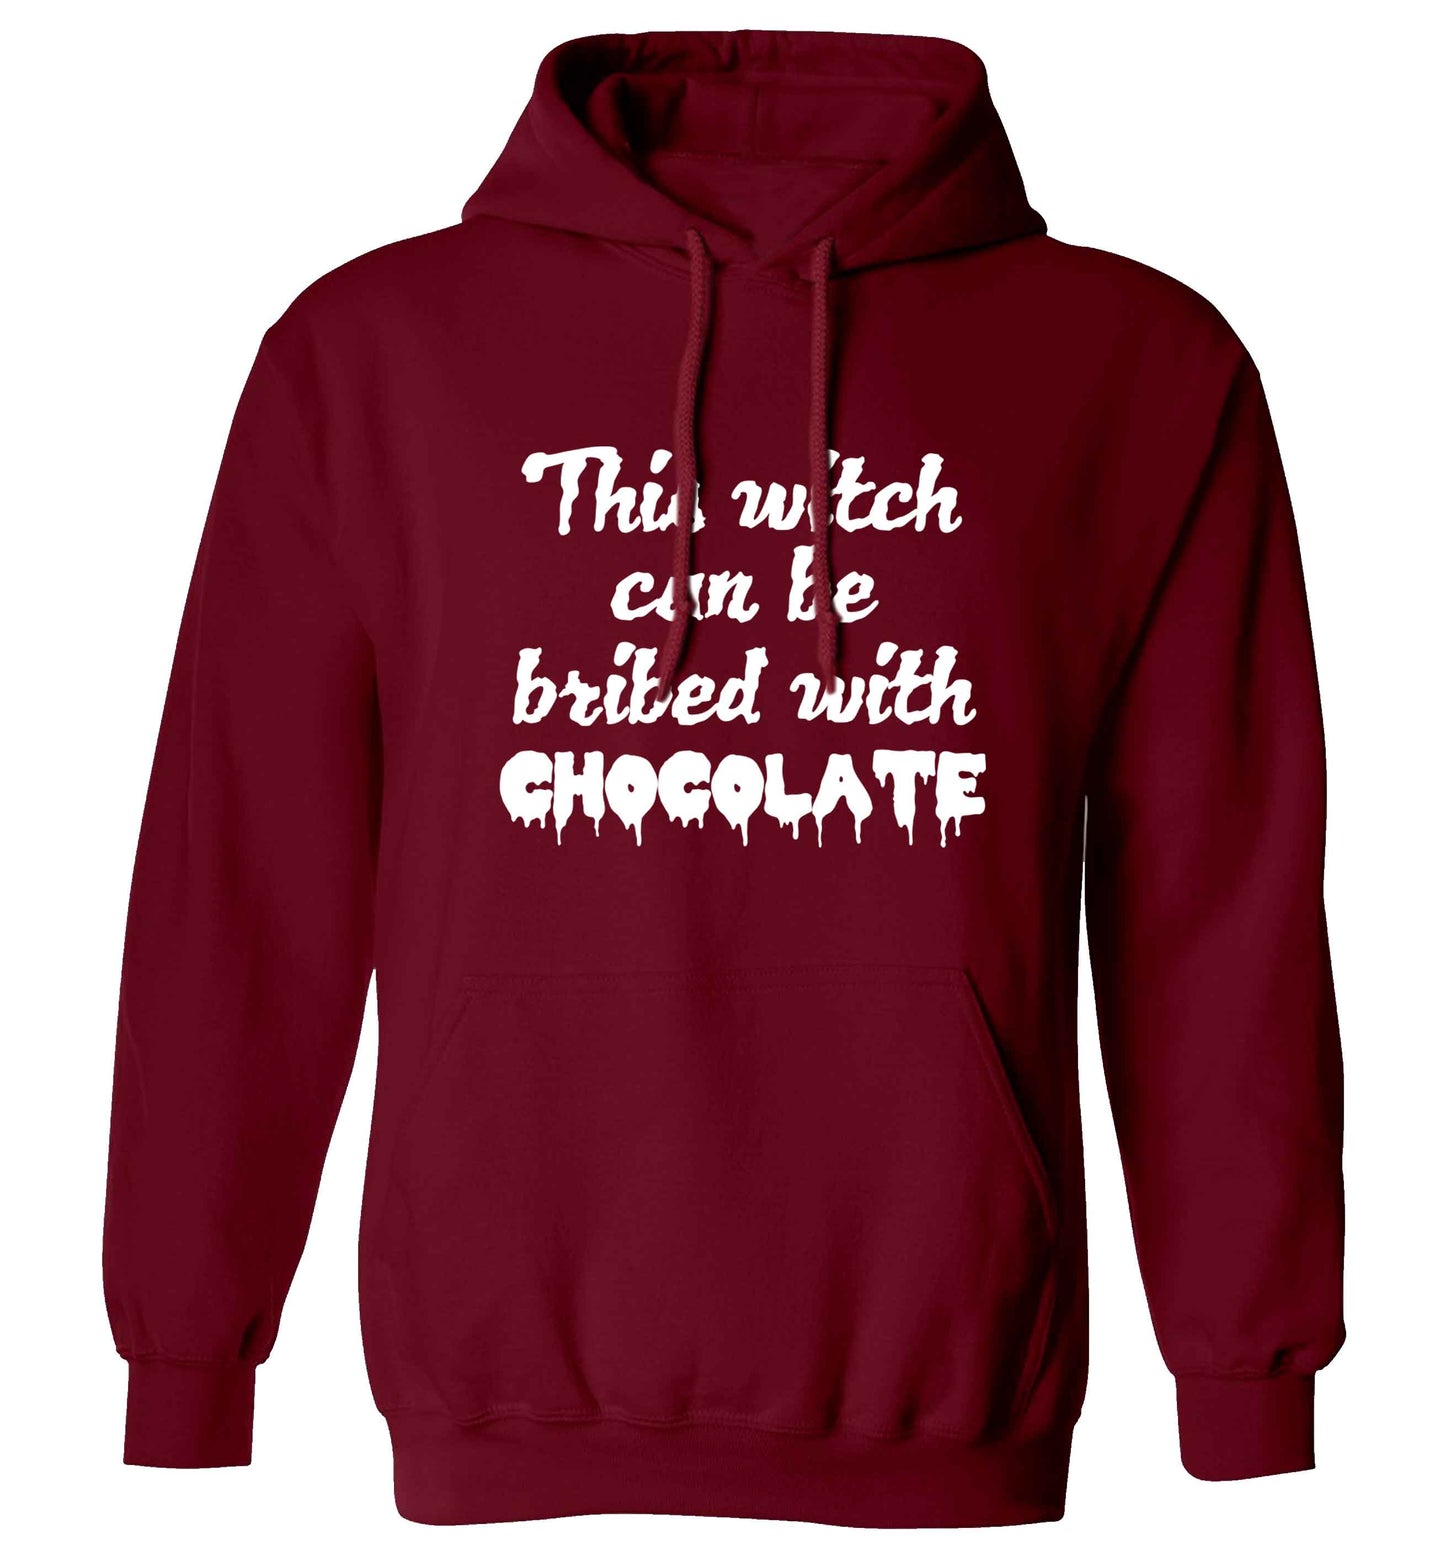 This witch can be bribed with chocolate adults unisex maroon hoodie 2XL